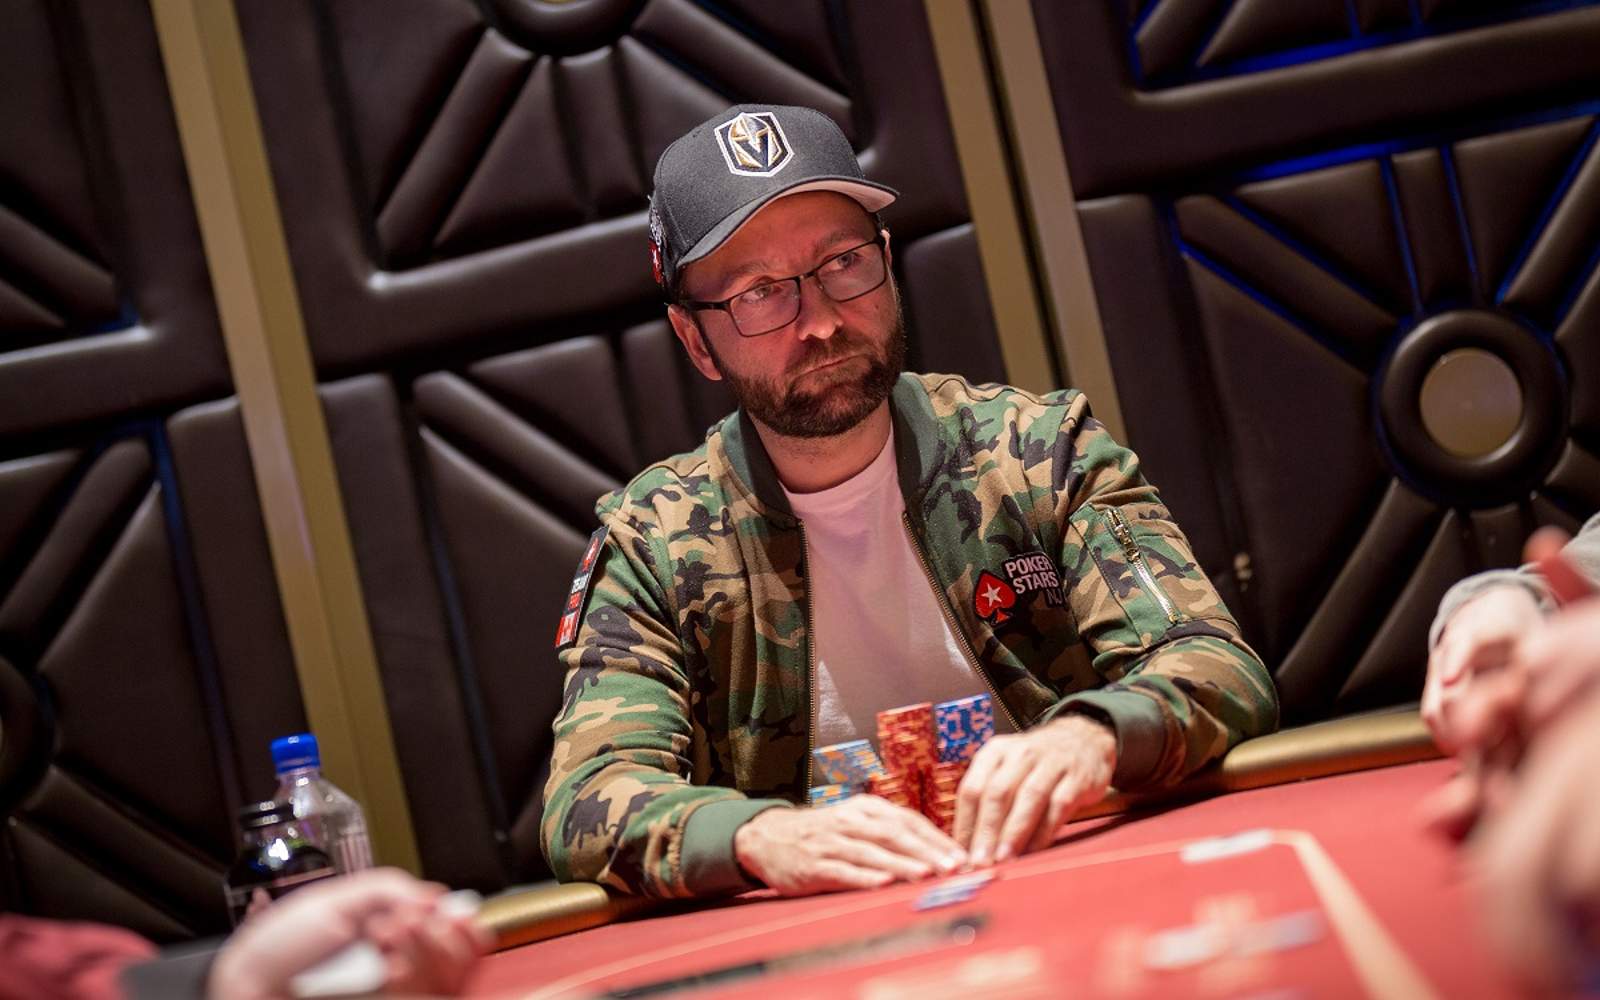 Daniel Negreanu on Needling Phil Hellmuth at the Poker Masters